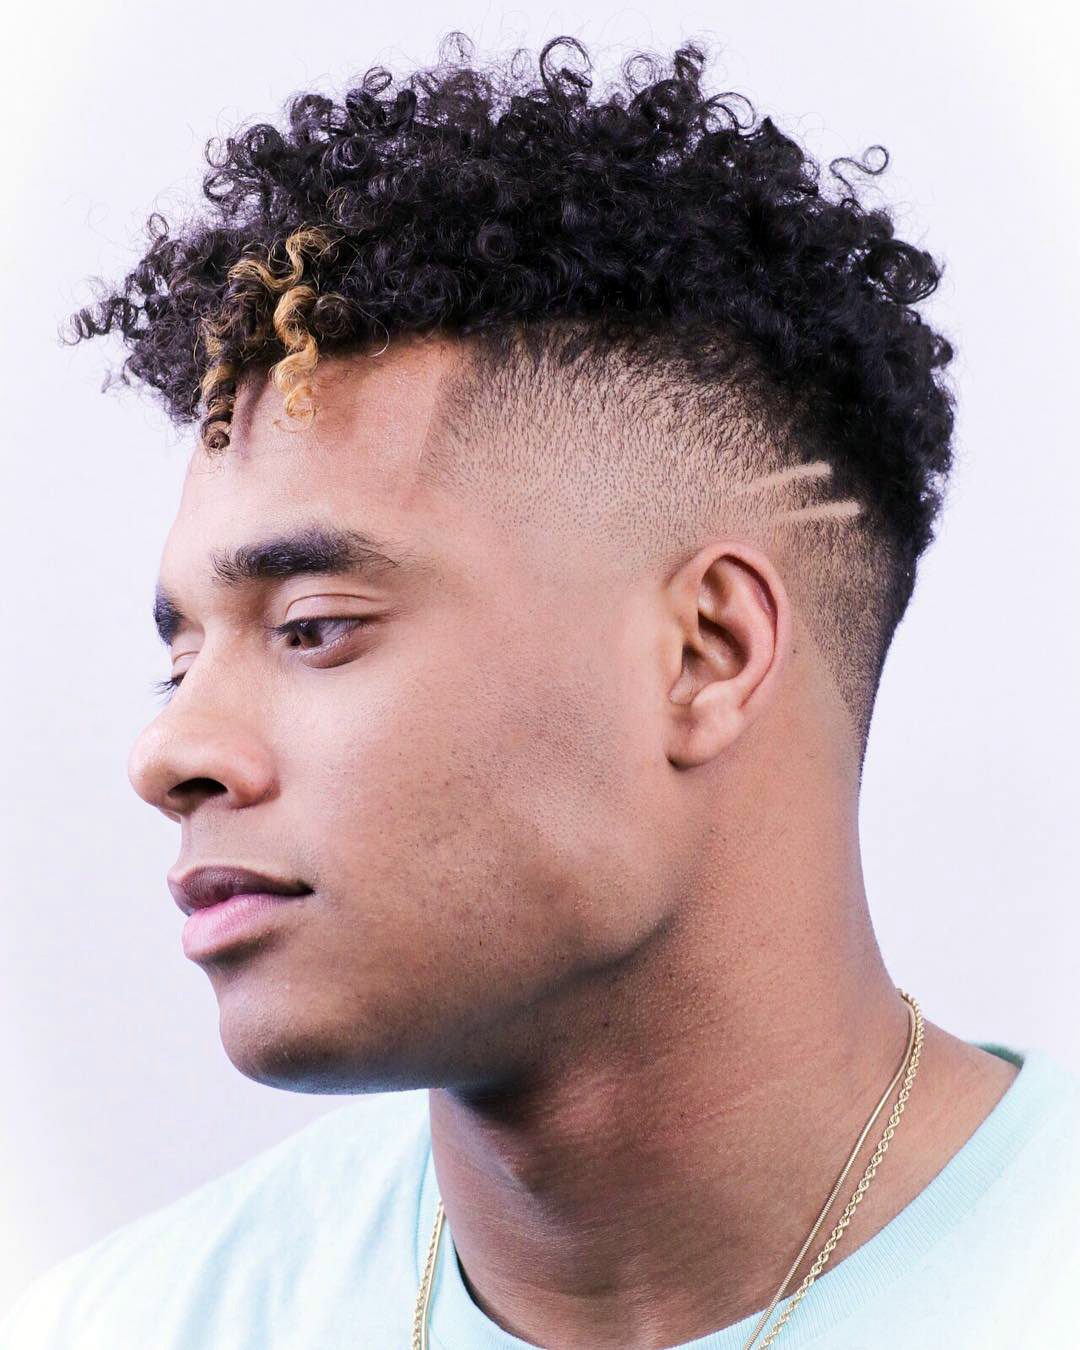 Curly Hair Undercut 14 Styles for Men to Try in 2022  All Things Hair